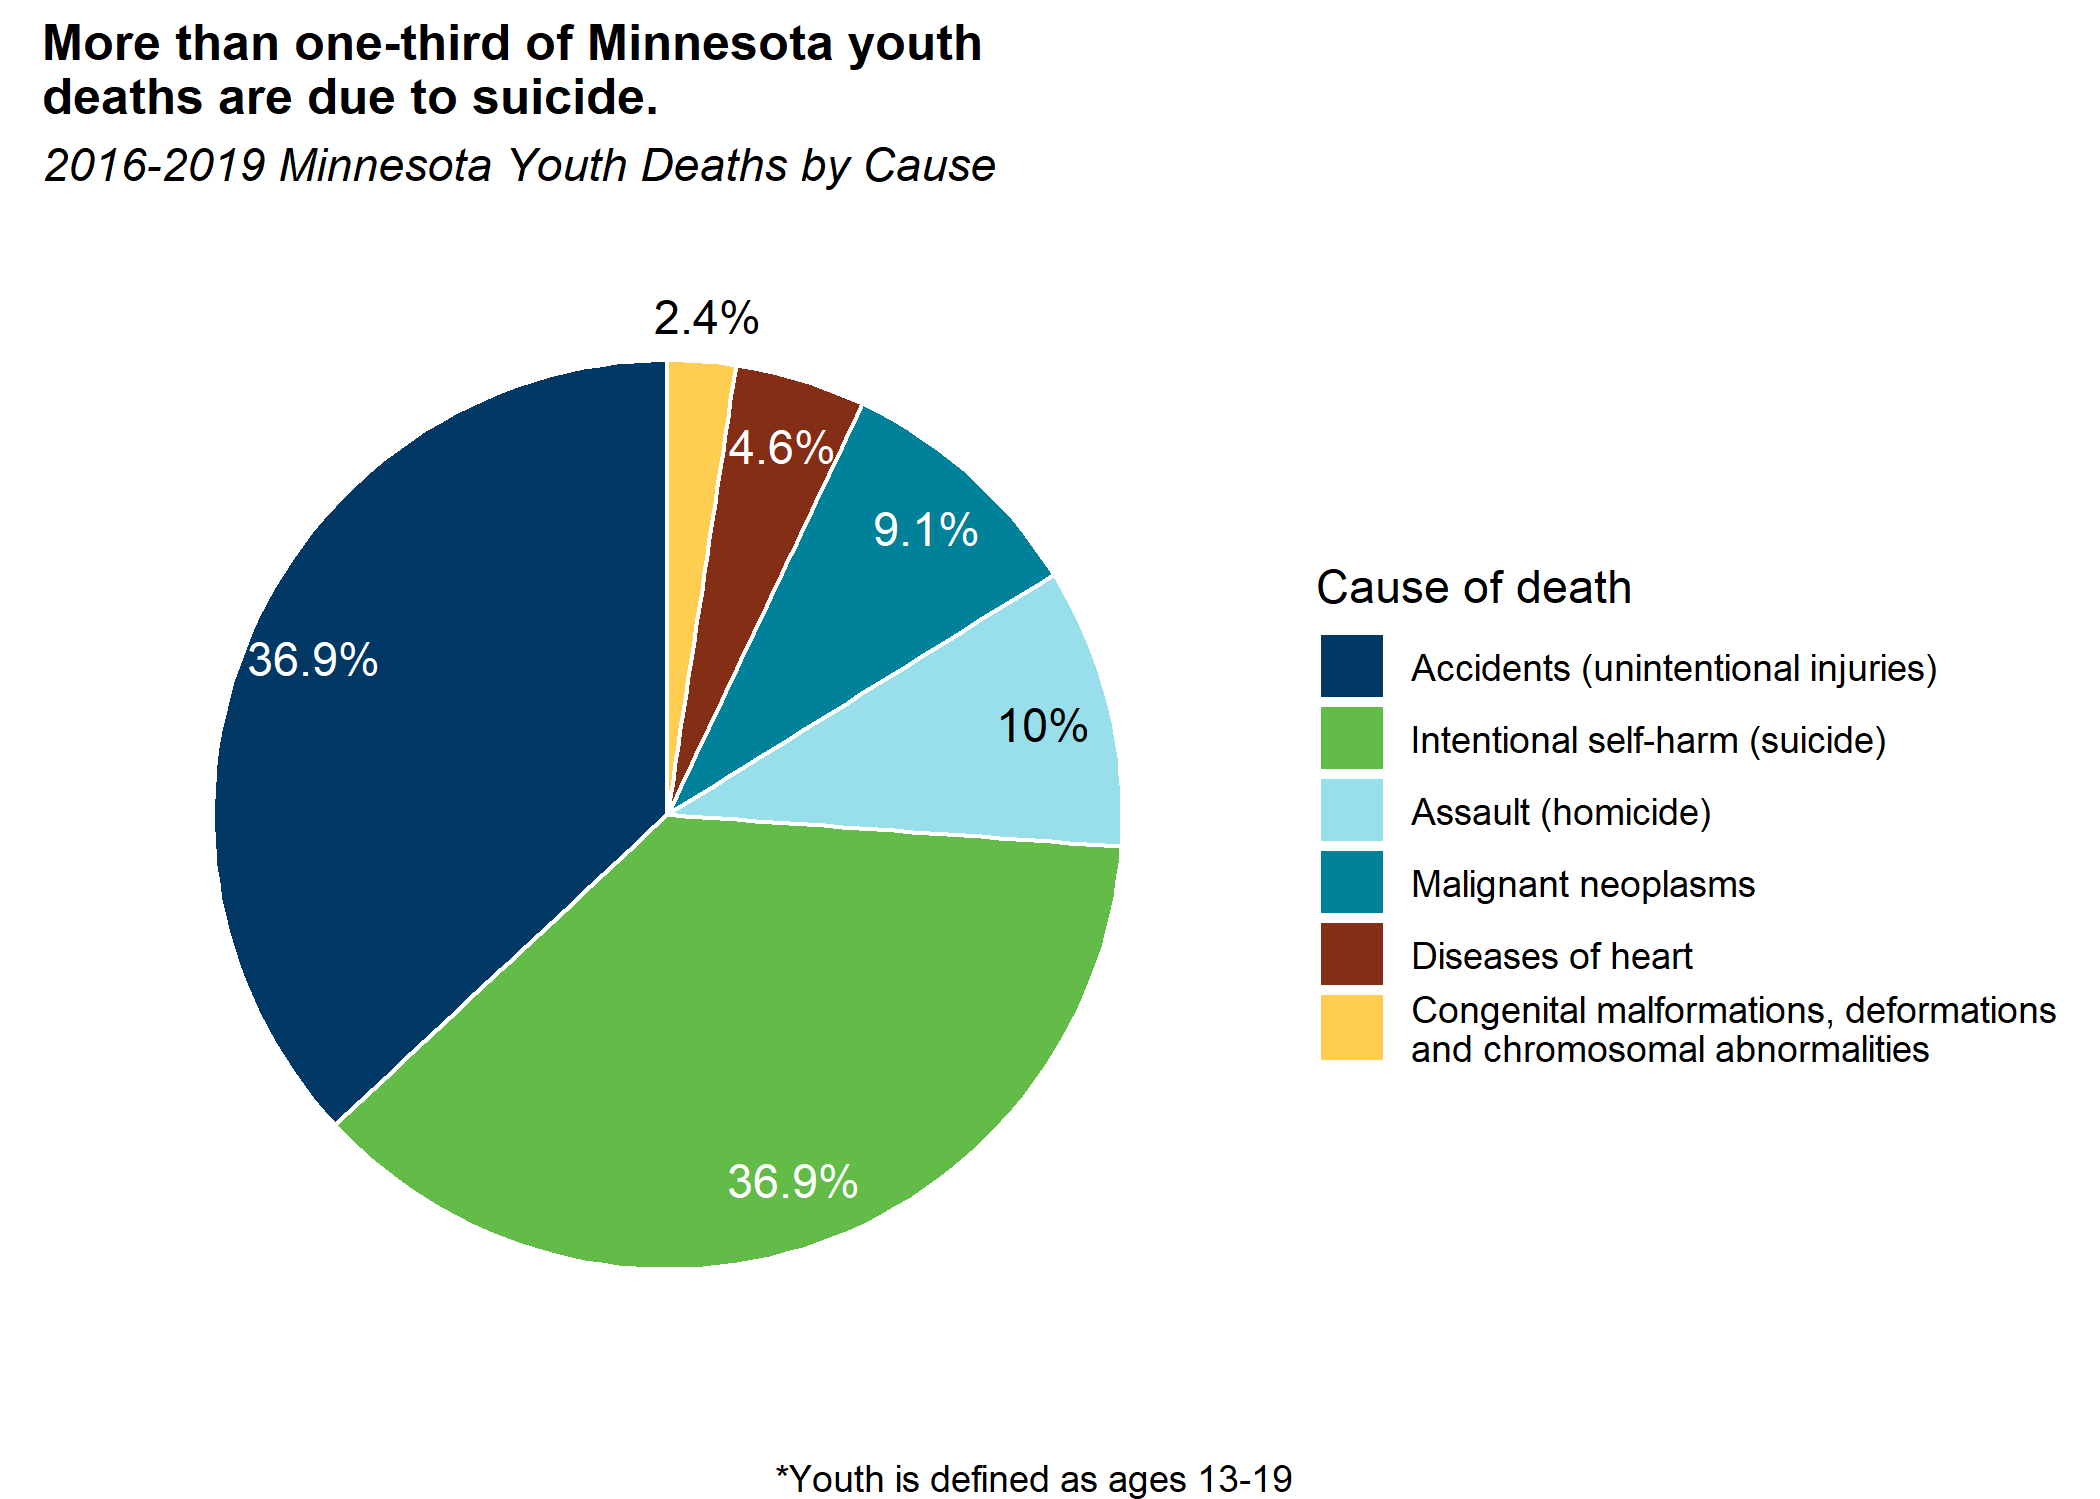 More than one-third of Minnesota youth deaths are due to suicide. 